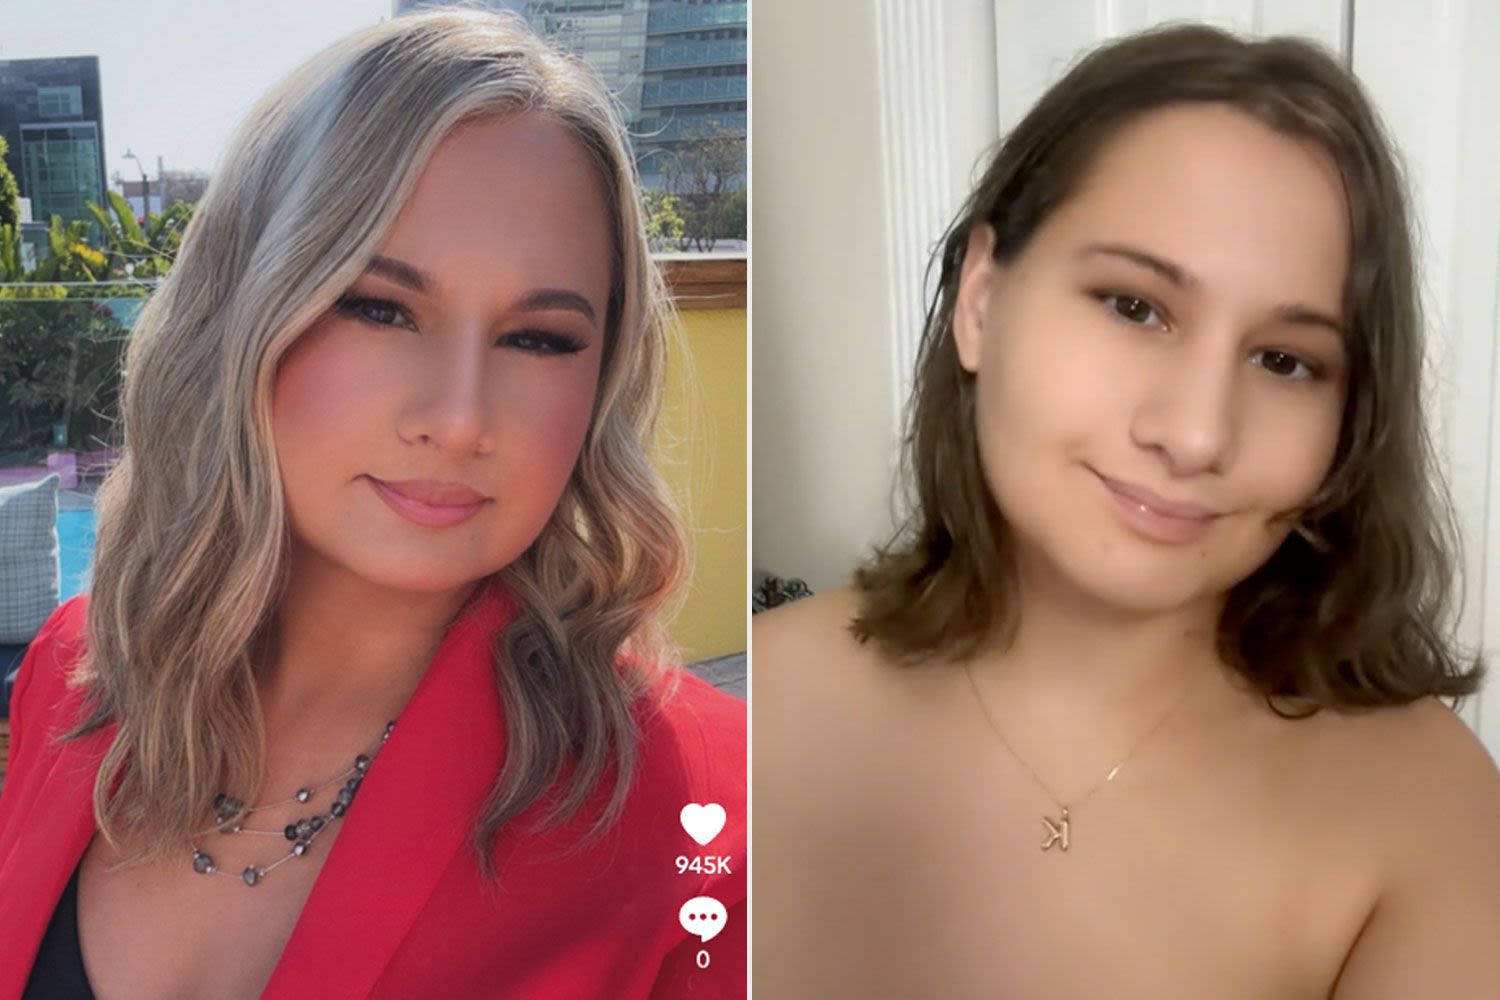 Gypsy-Rose Blanchard Ditches the Blonde and Dyes Hair Back to Brunette: ‘My Natural’